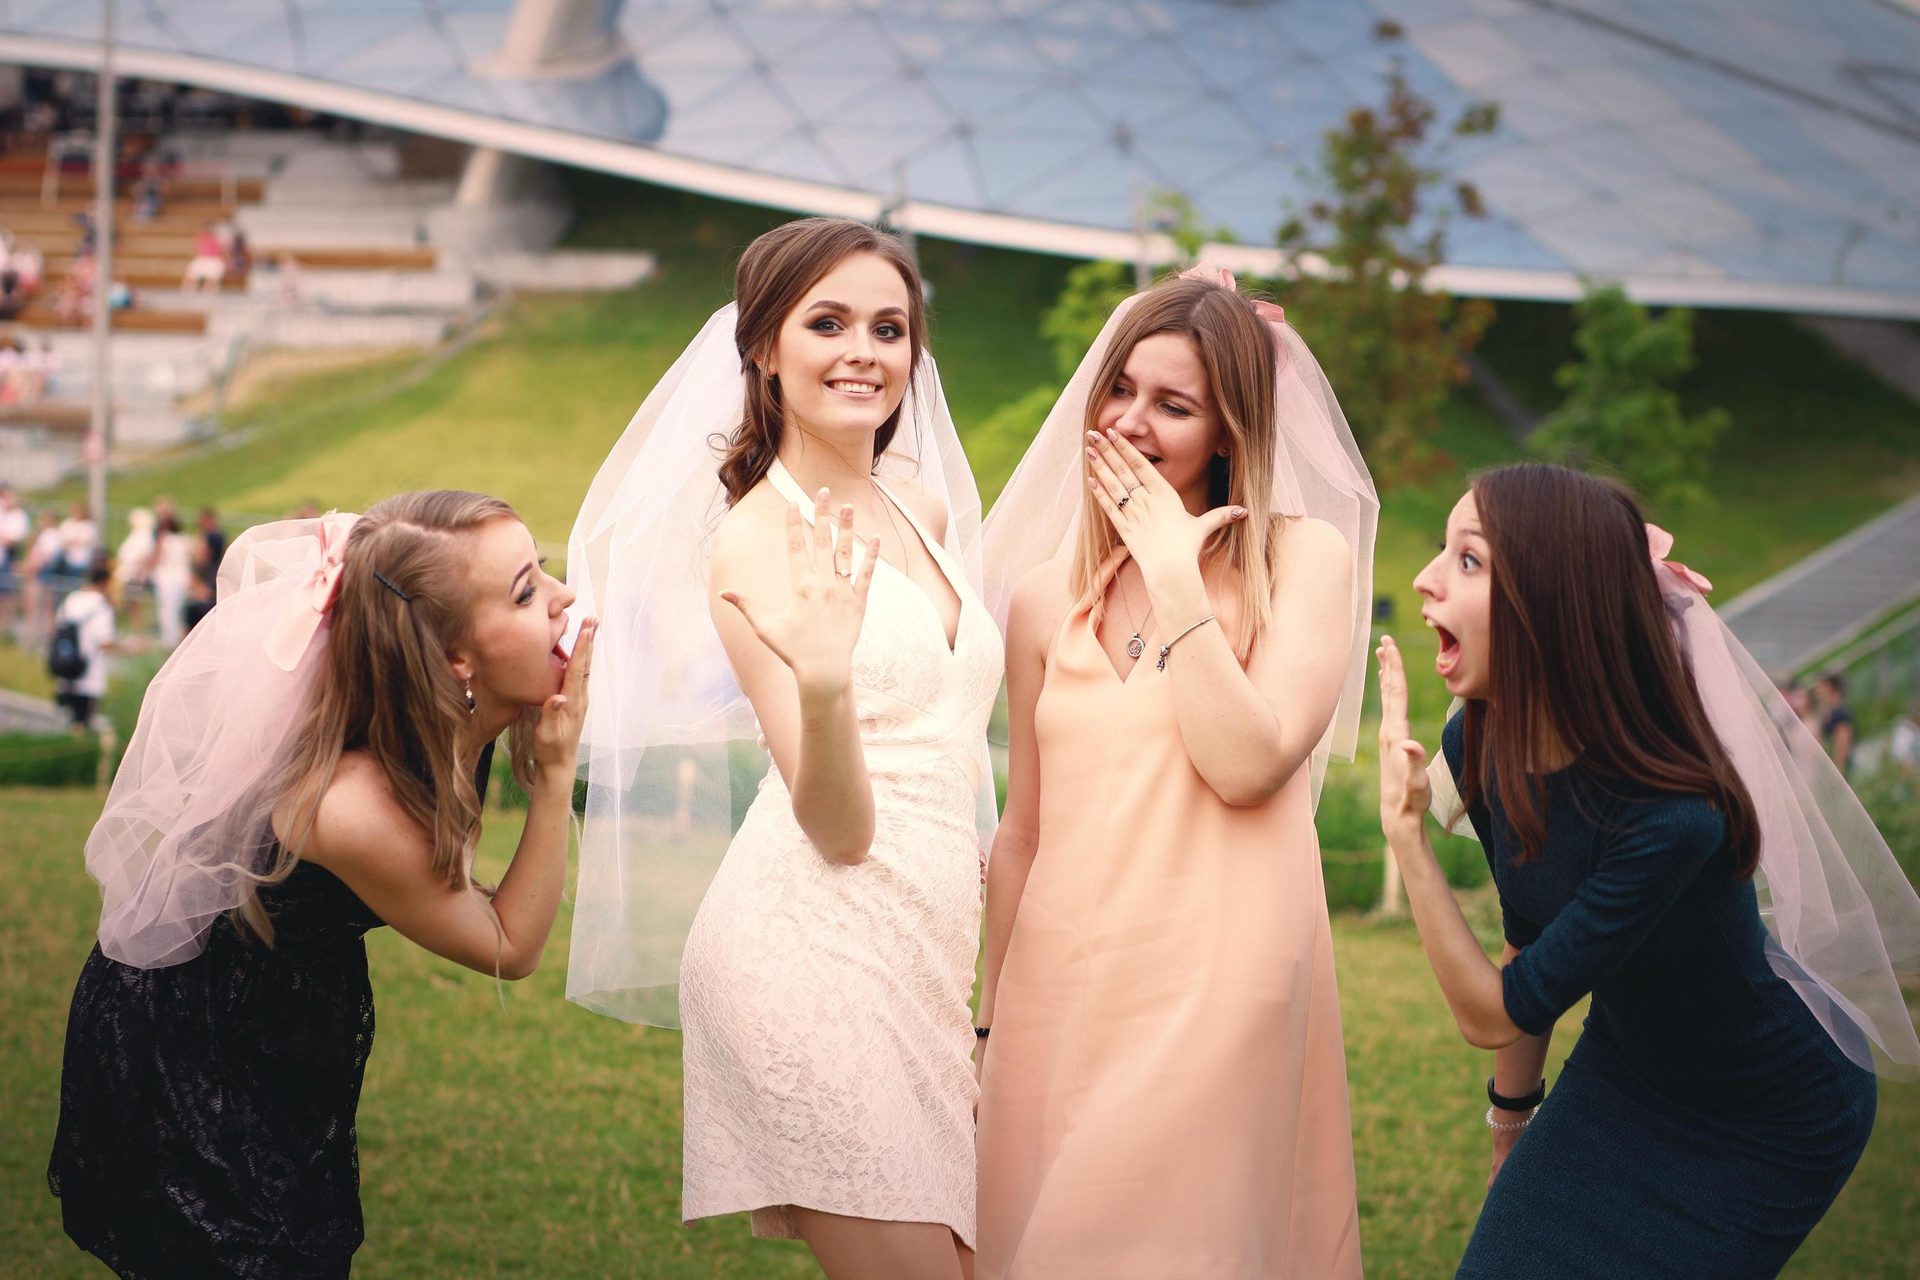 People in nature, Flash photography, Bridal clothing, Smile, Dress, Plant, Happy, Gesture, Fun